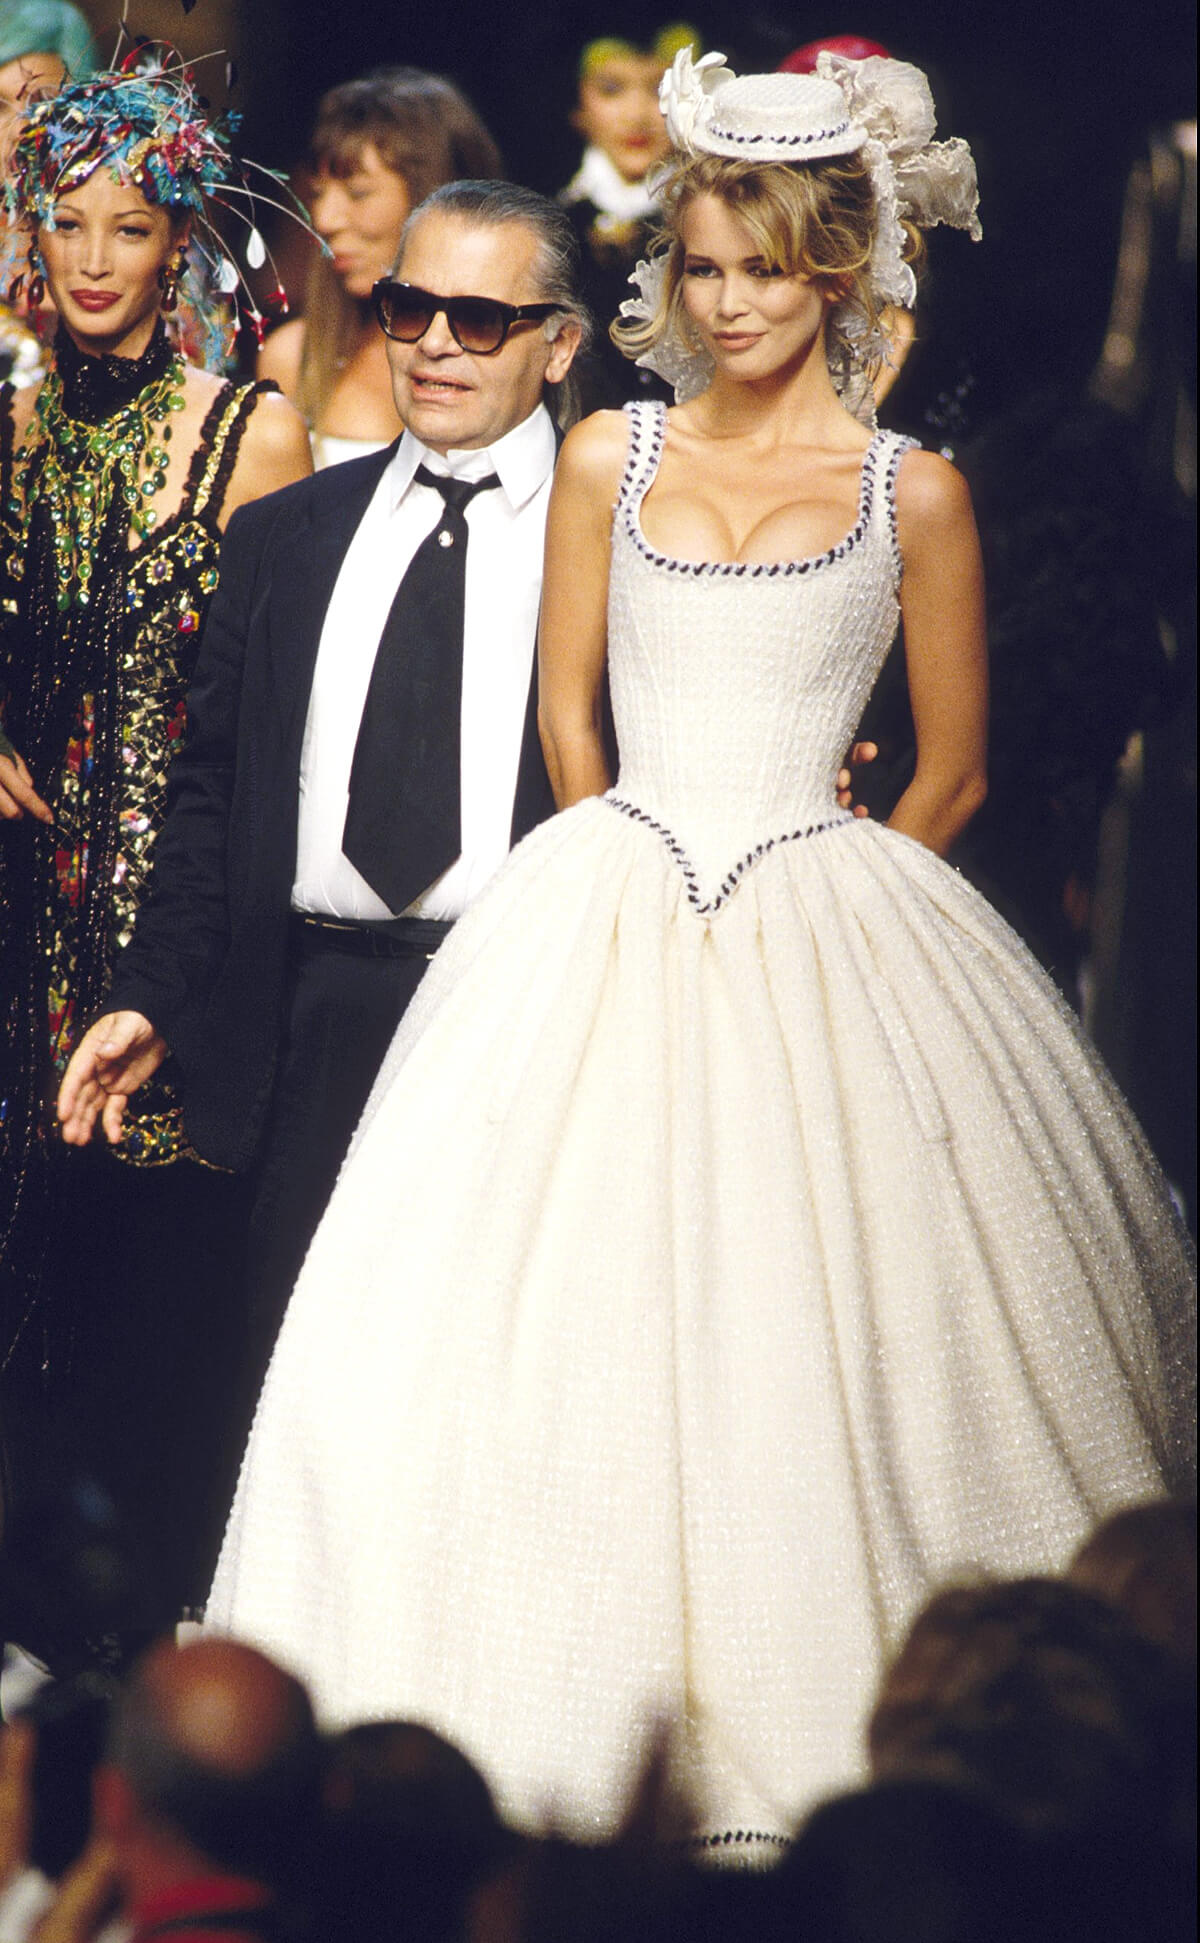 A comprehensive history of Chanel - Haute History